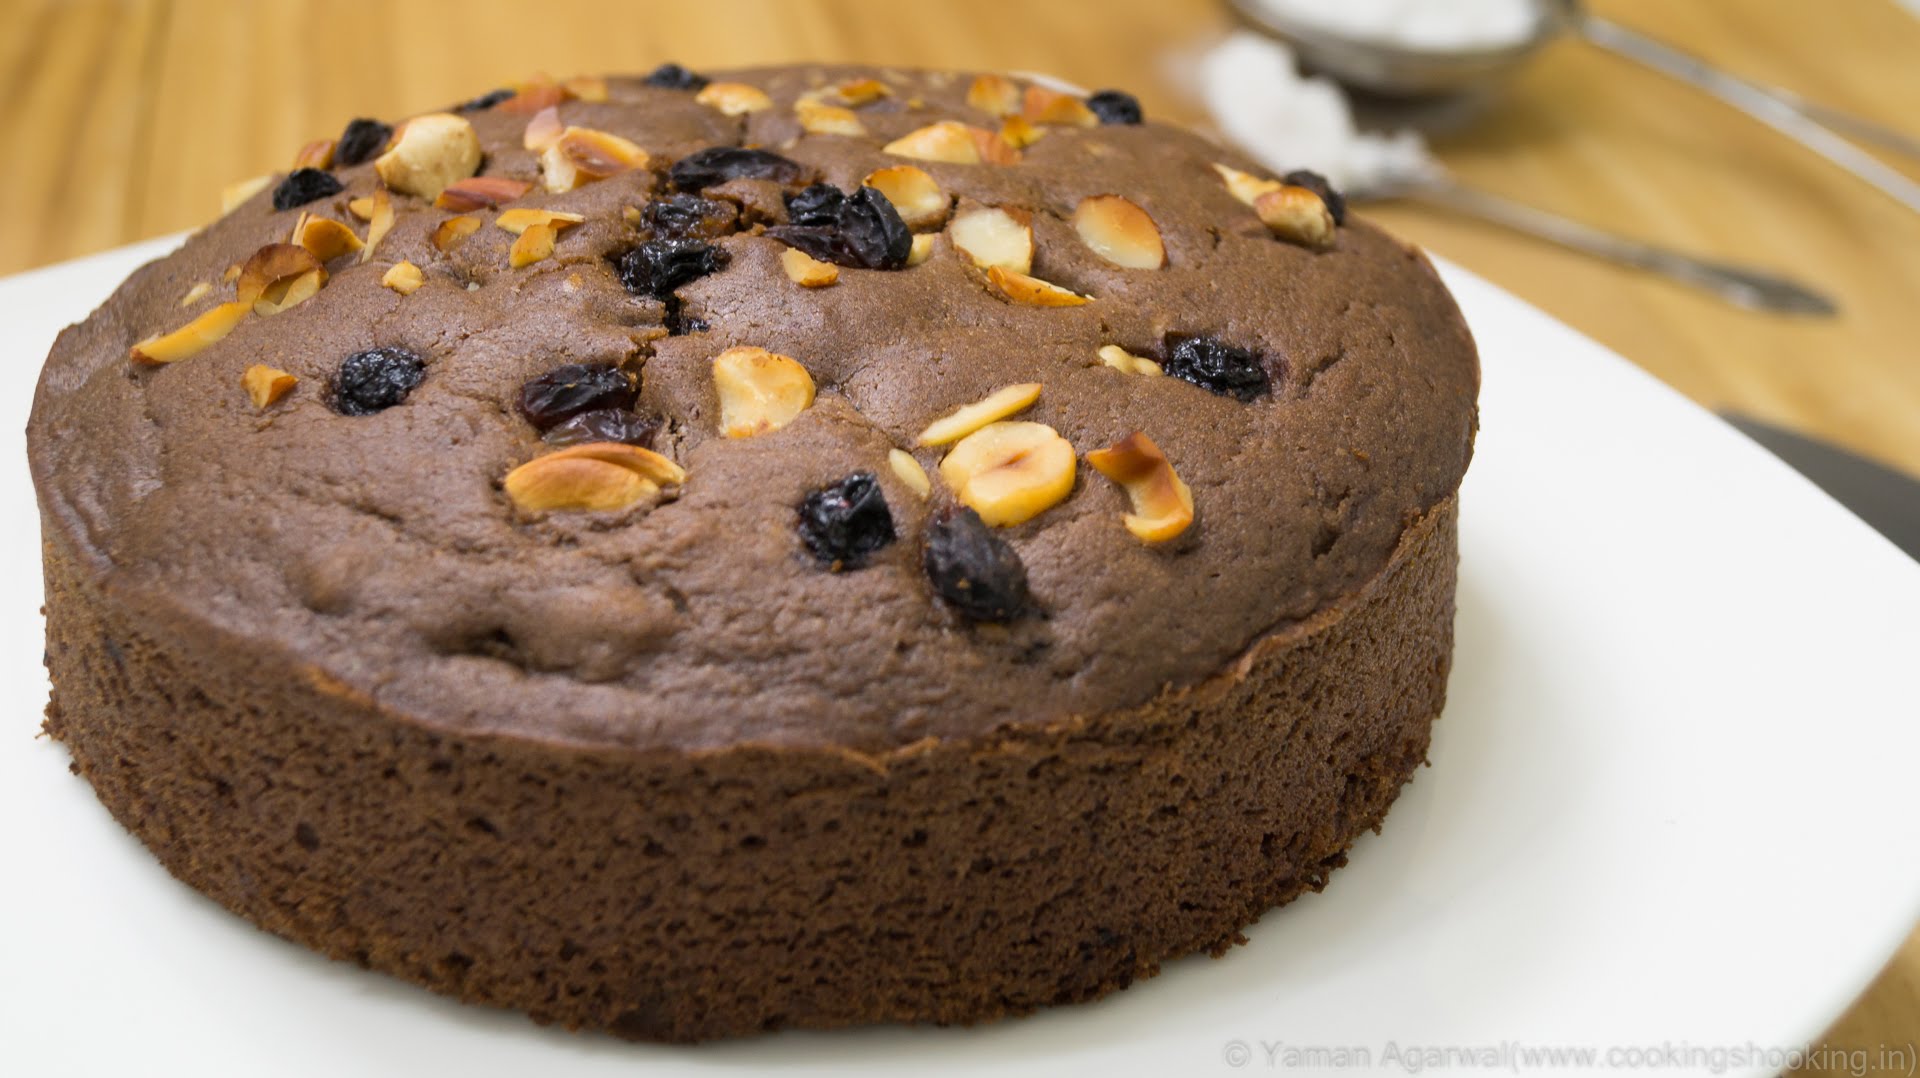 Pressure Cooker Eggless Chocolate Nuts Cake Recipe | Eggless Baking Without Oven